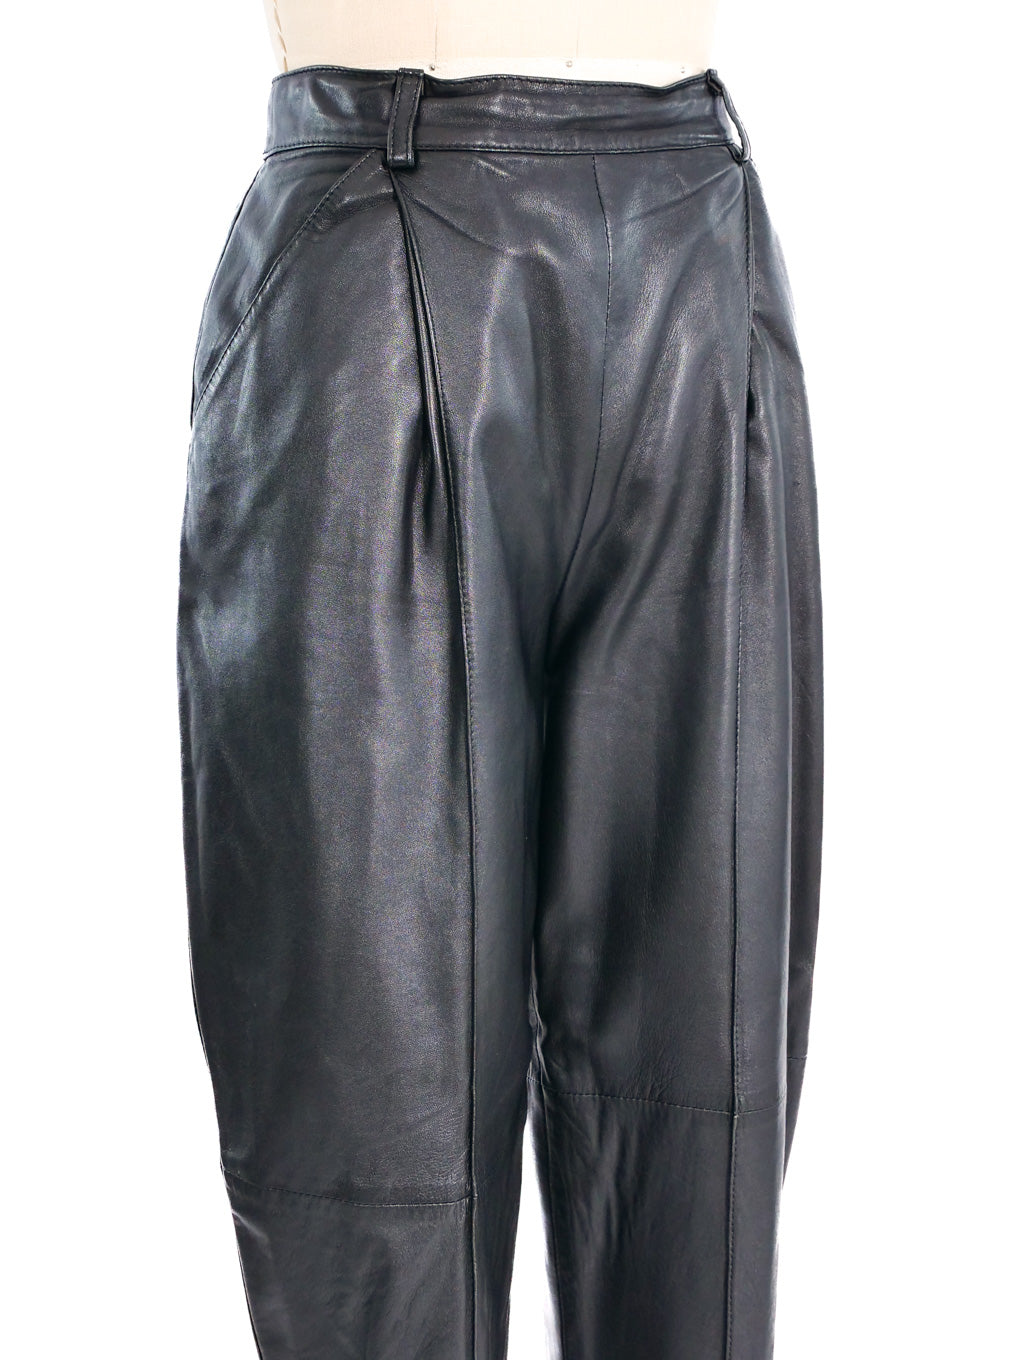 Versus By Gianni Versace Leather Trousers